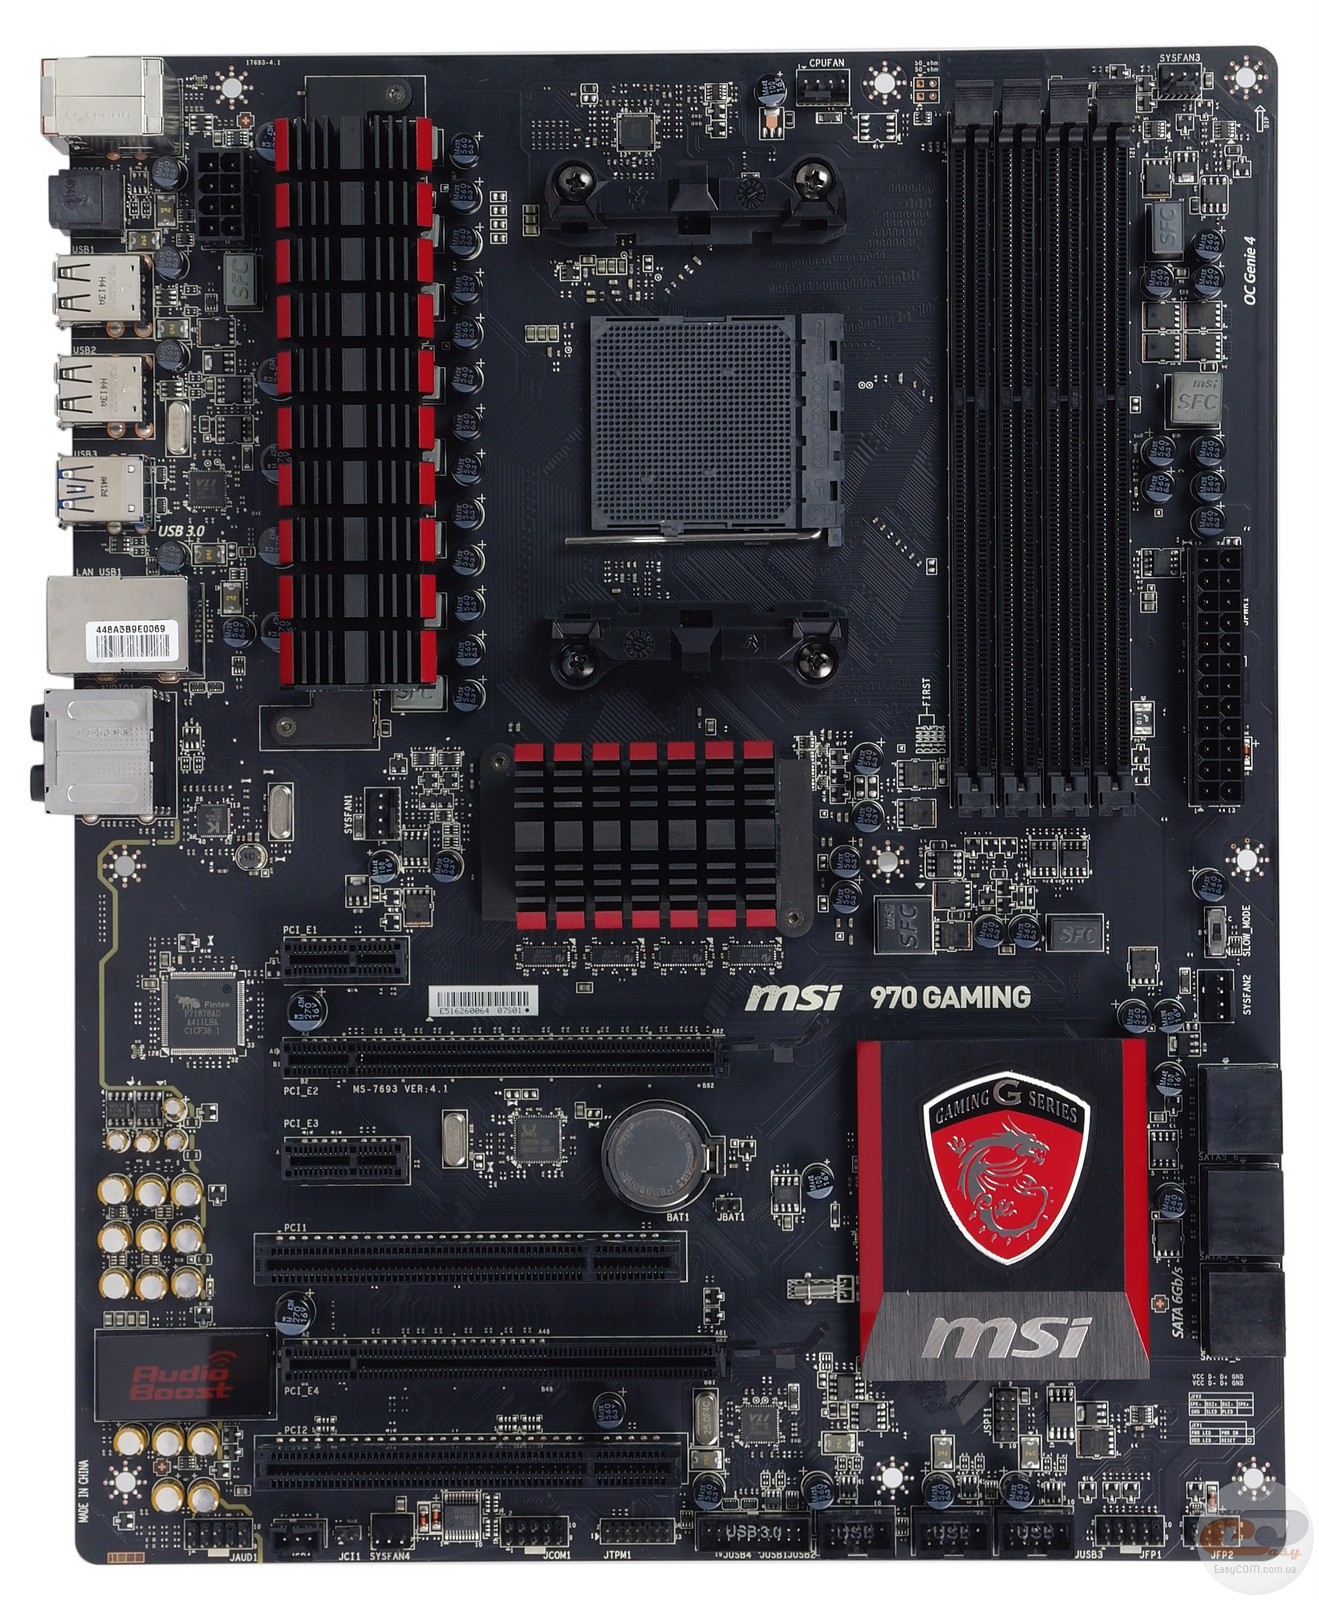 MSI 970 GAMING motherboard review and testing. GECID.com